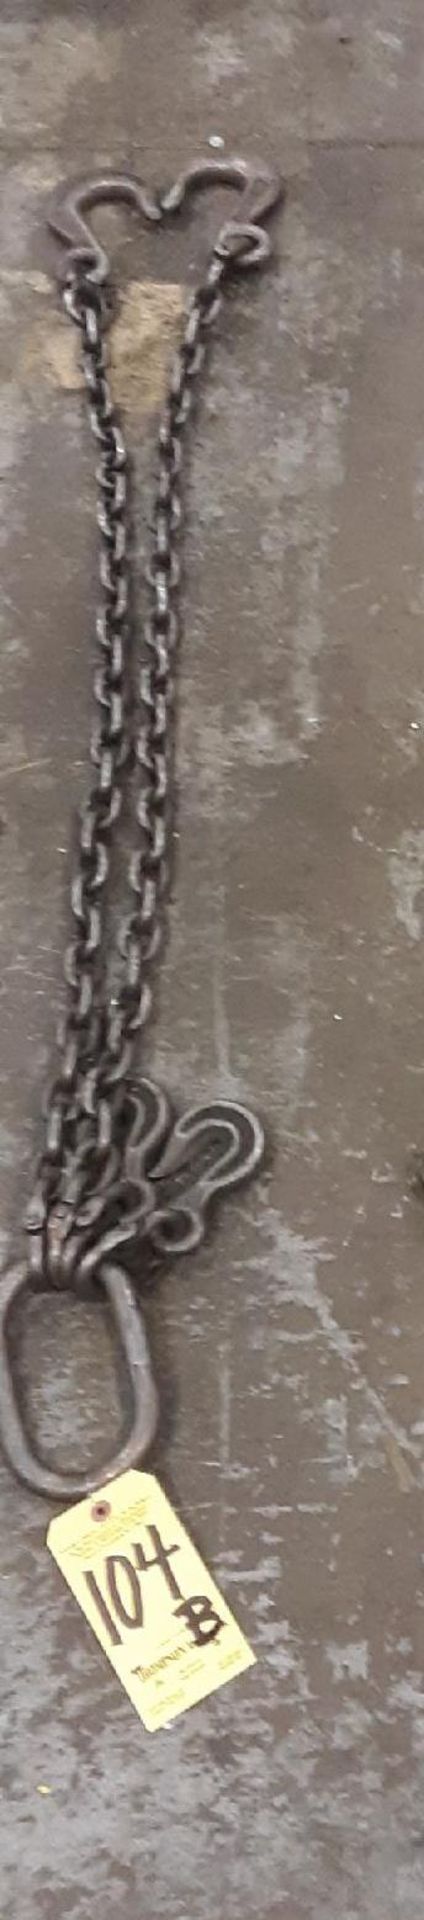 Lifting Chain, 2-Hook, 4 Ft. 4 In. Long, 11,400 Lb. Capacity